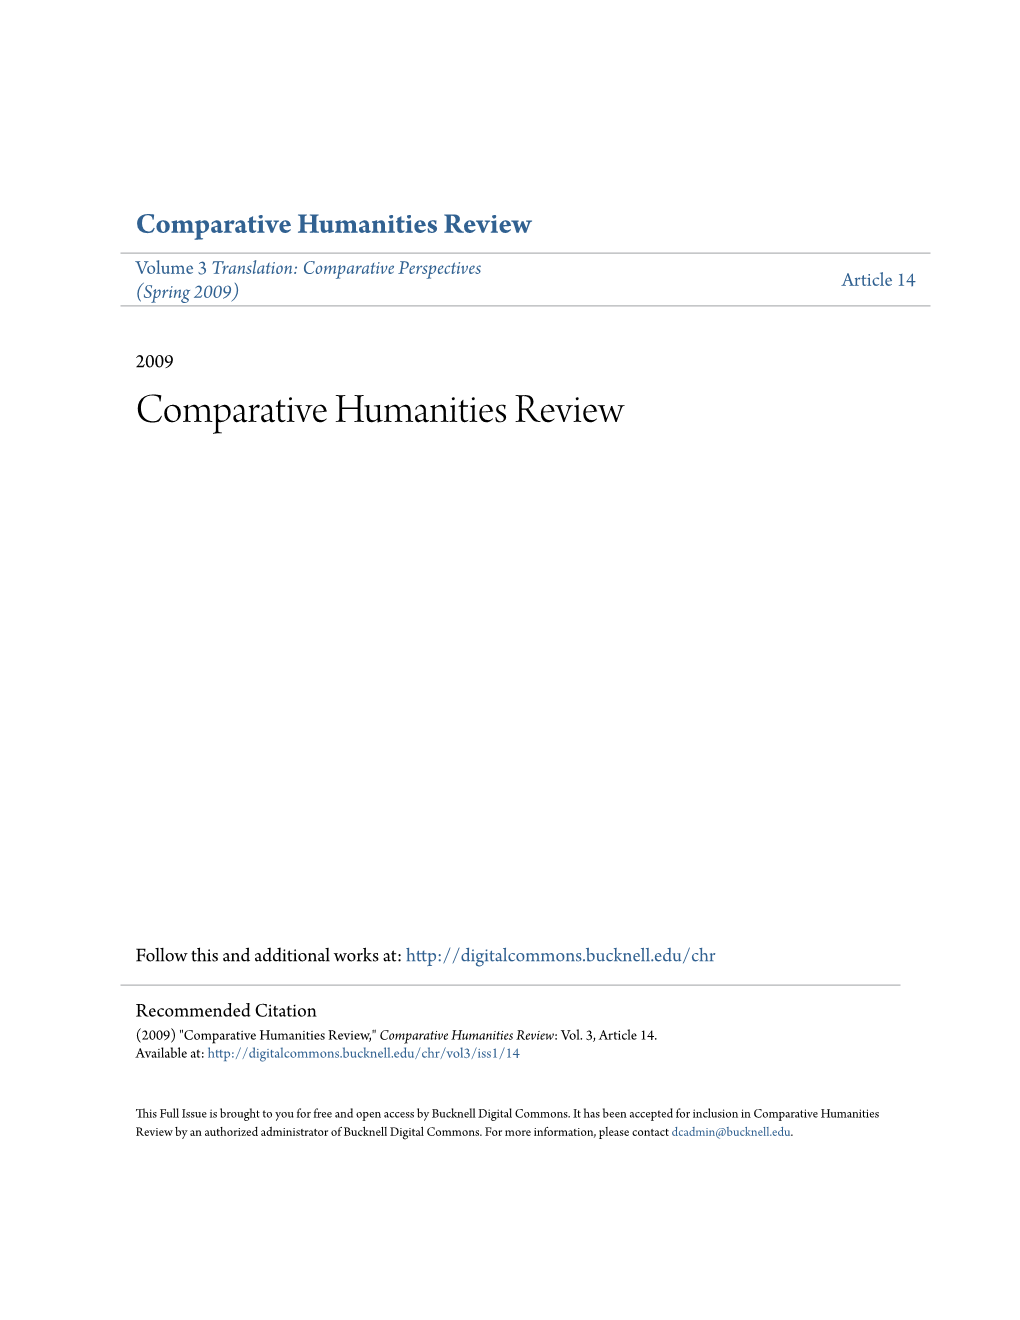 Comparative Humanities Review Volume 3 Translation: Comparative Perspectives Article 14 (Spring 2009)